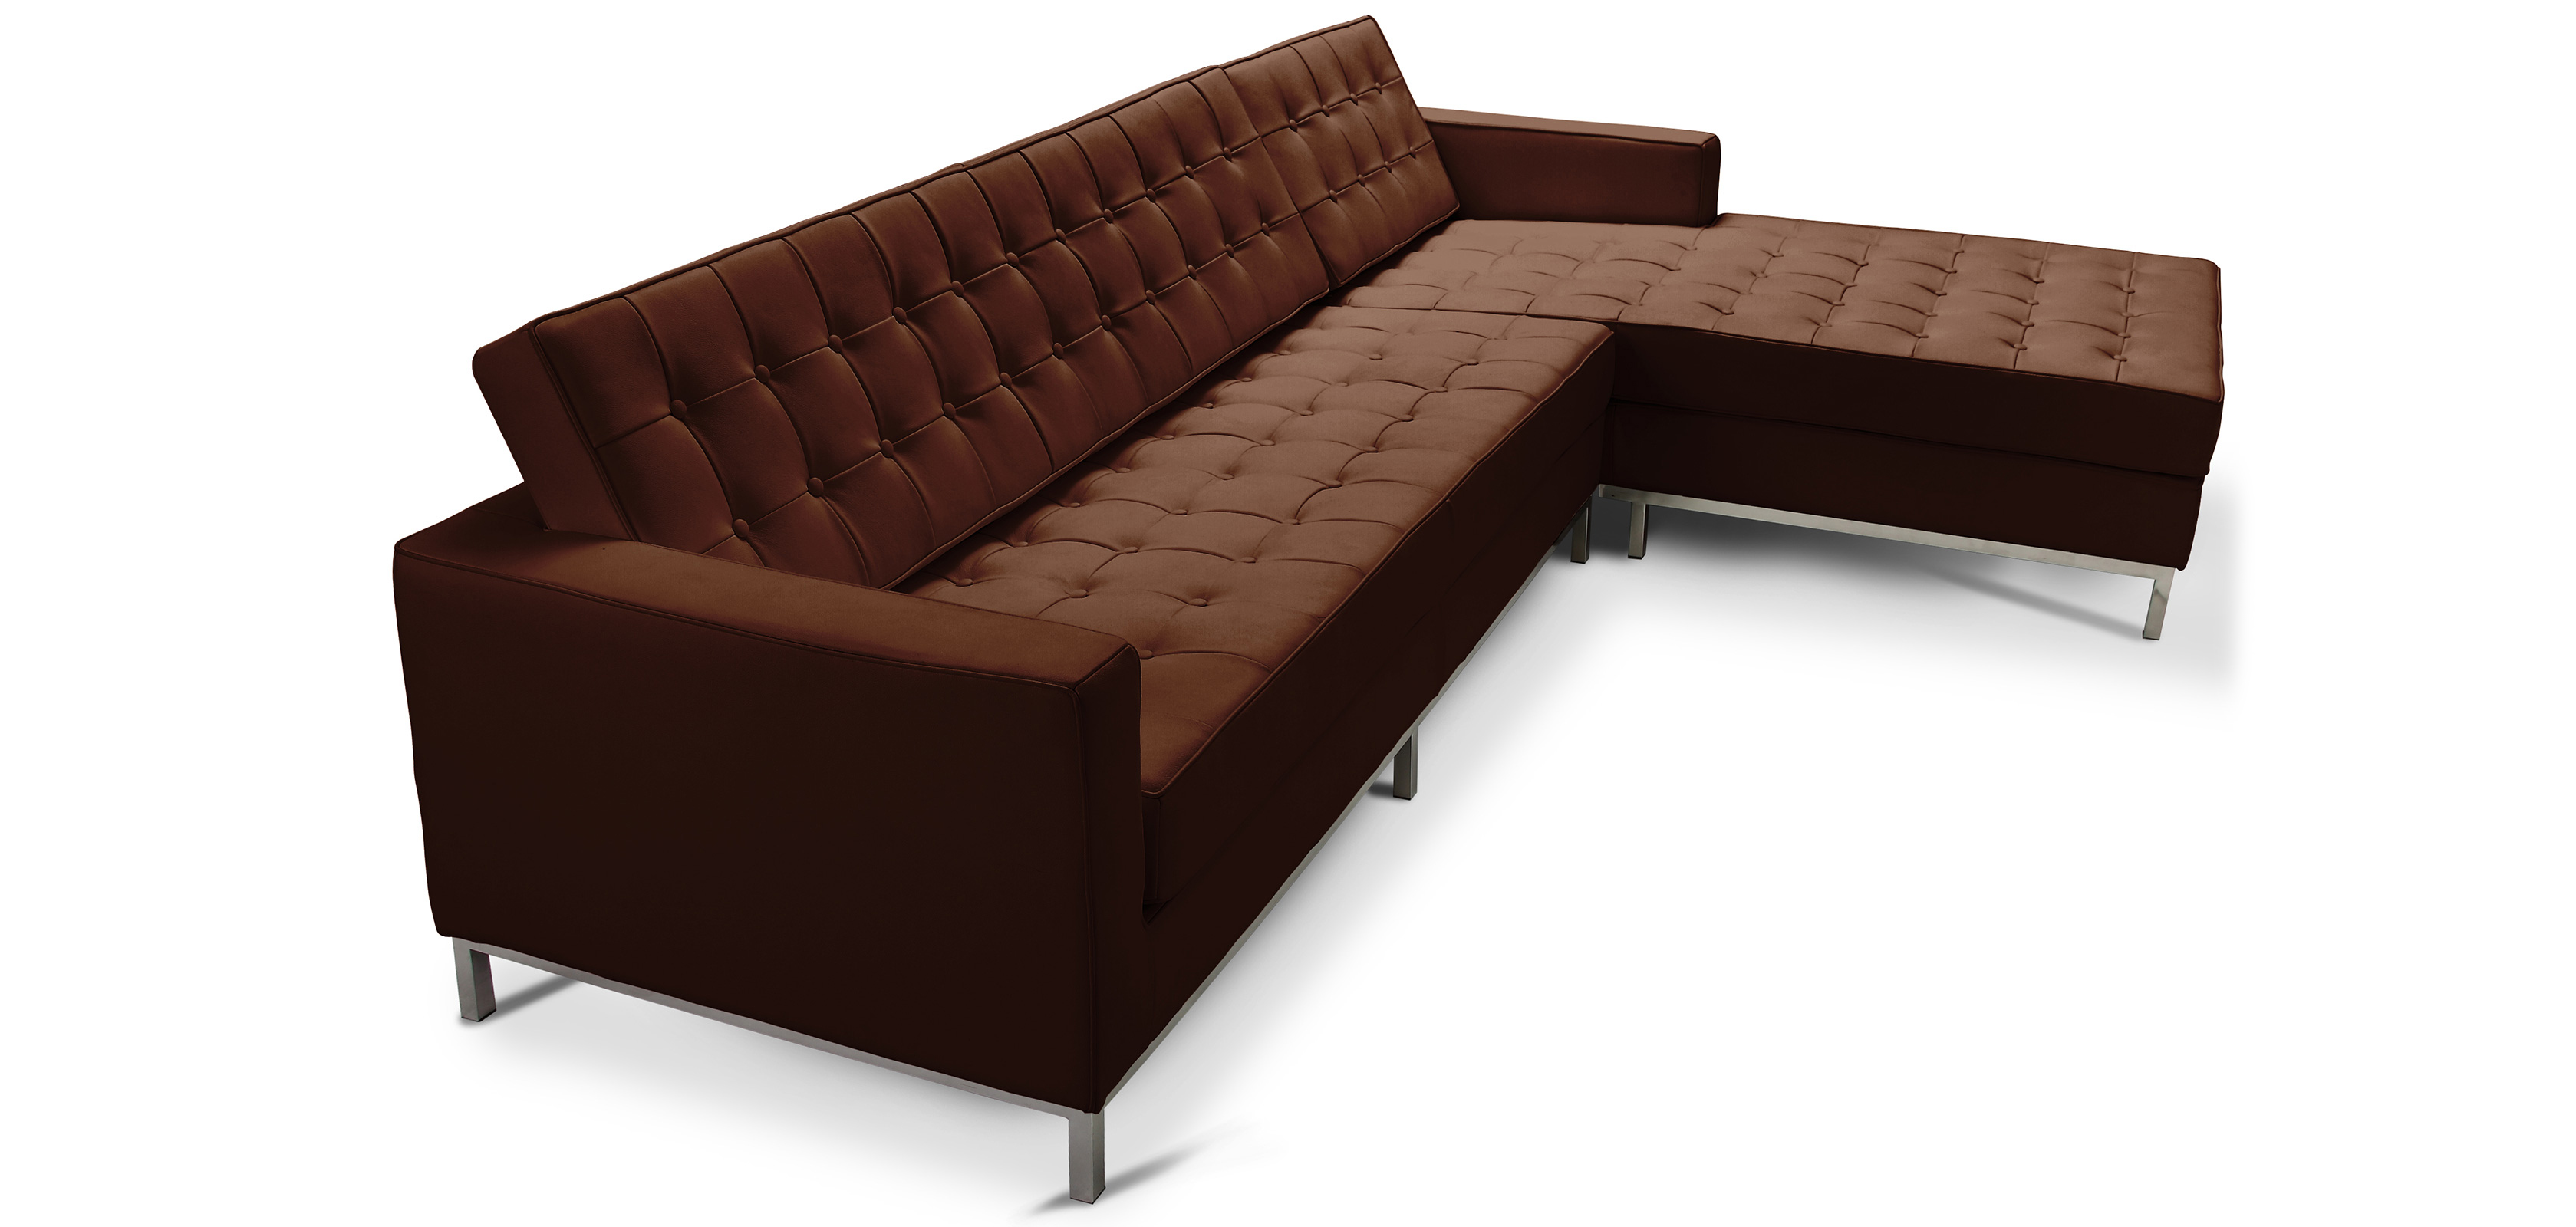 florence style leather sofa